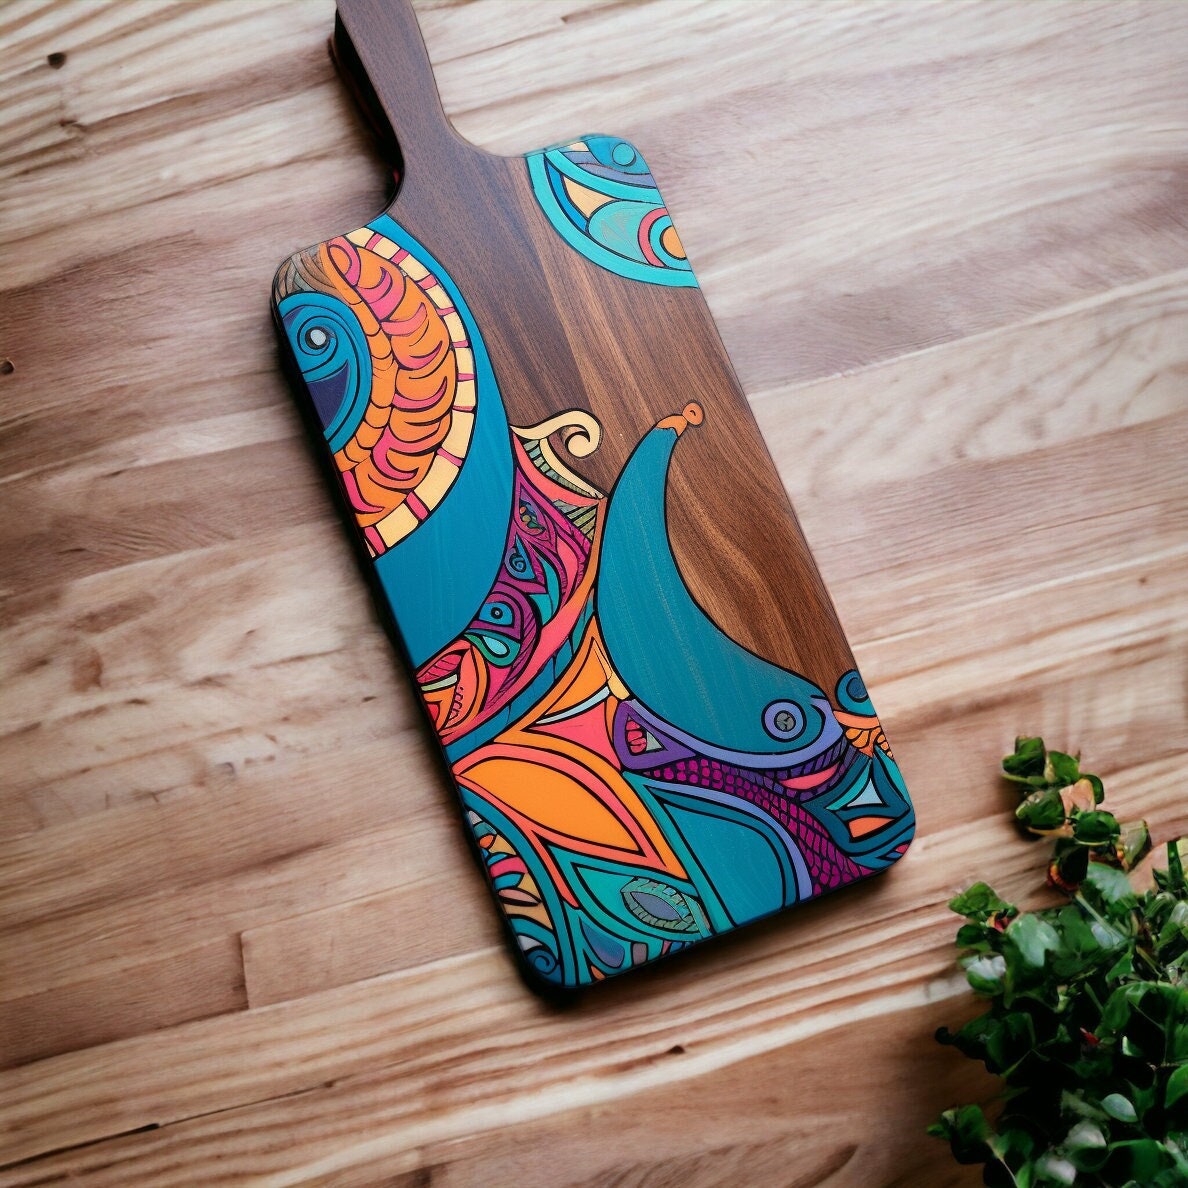 Personalize Your Own Artwork Cutting Board